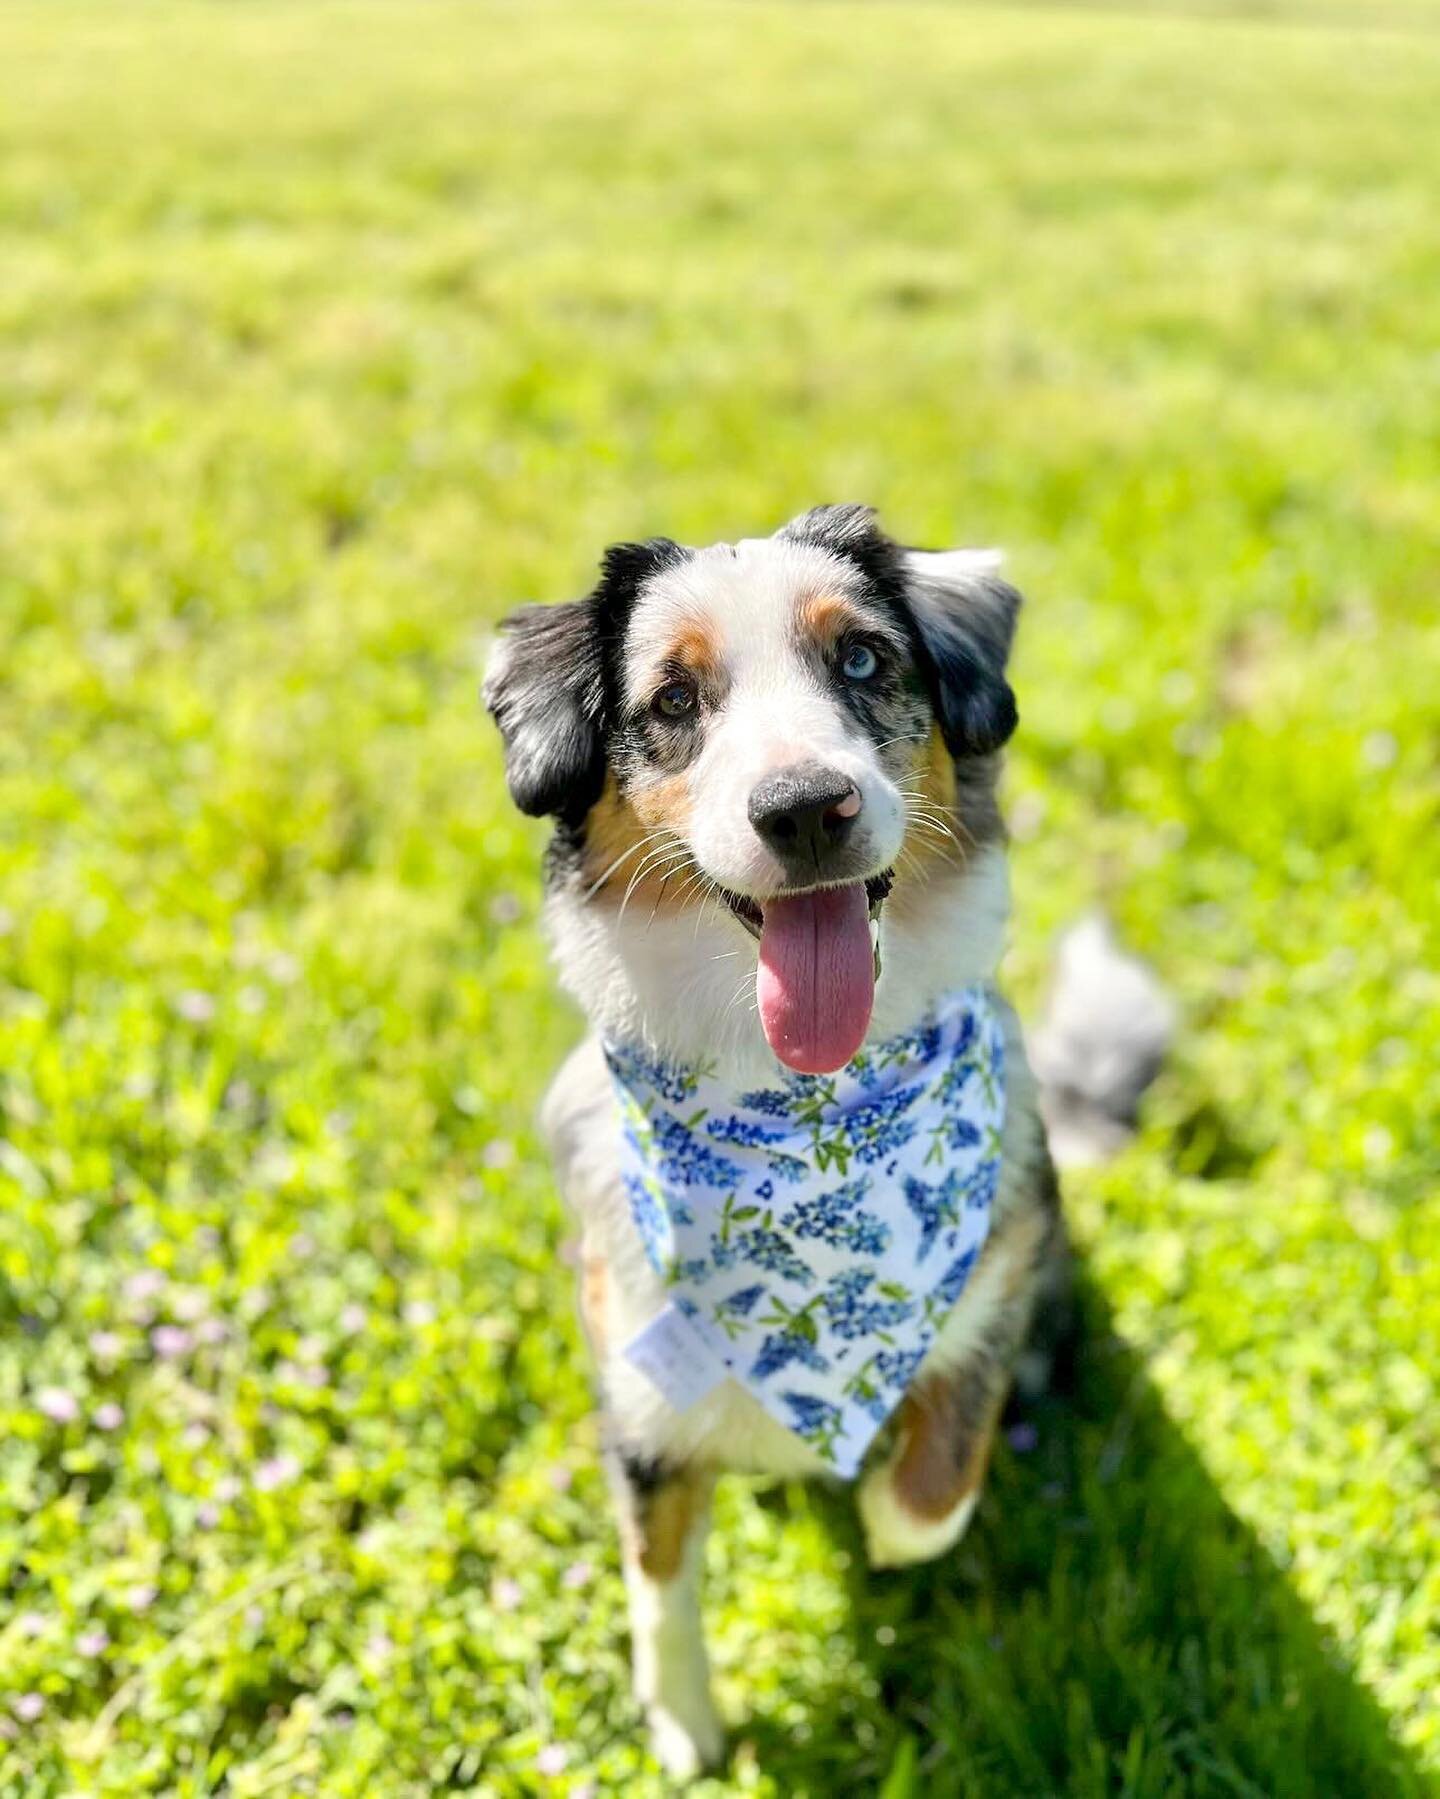 Sunshine and bluebonnets are my favorite accessories💙

@thetinytormentor is wearing a size small over the collar bandana!

#majorandmillie #shopsmall #smallbusiness #bluebonnet #dogmodel #dogaccessories